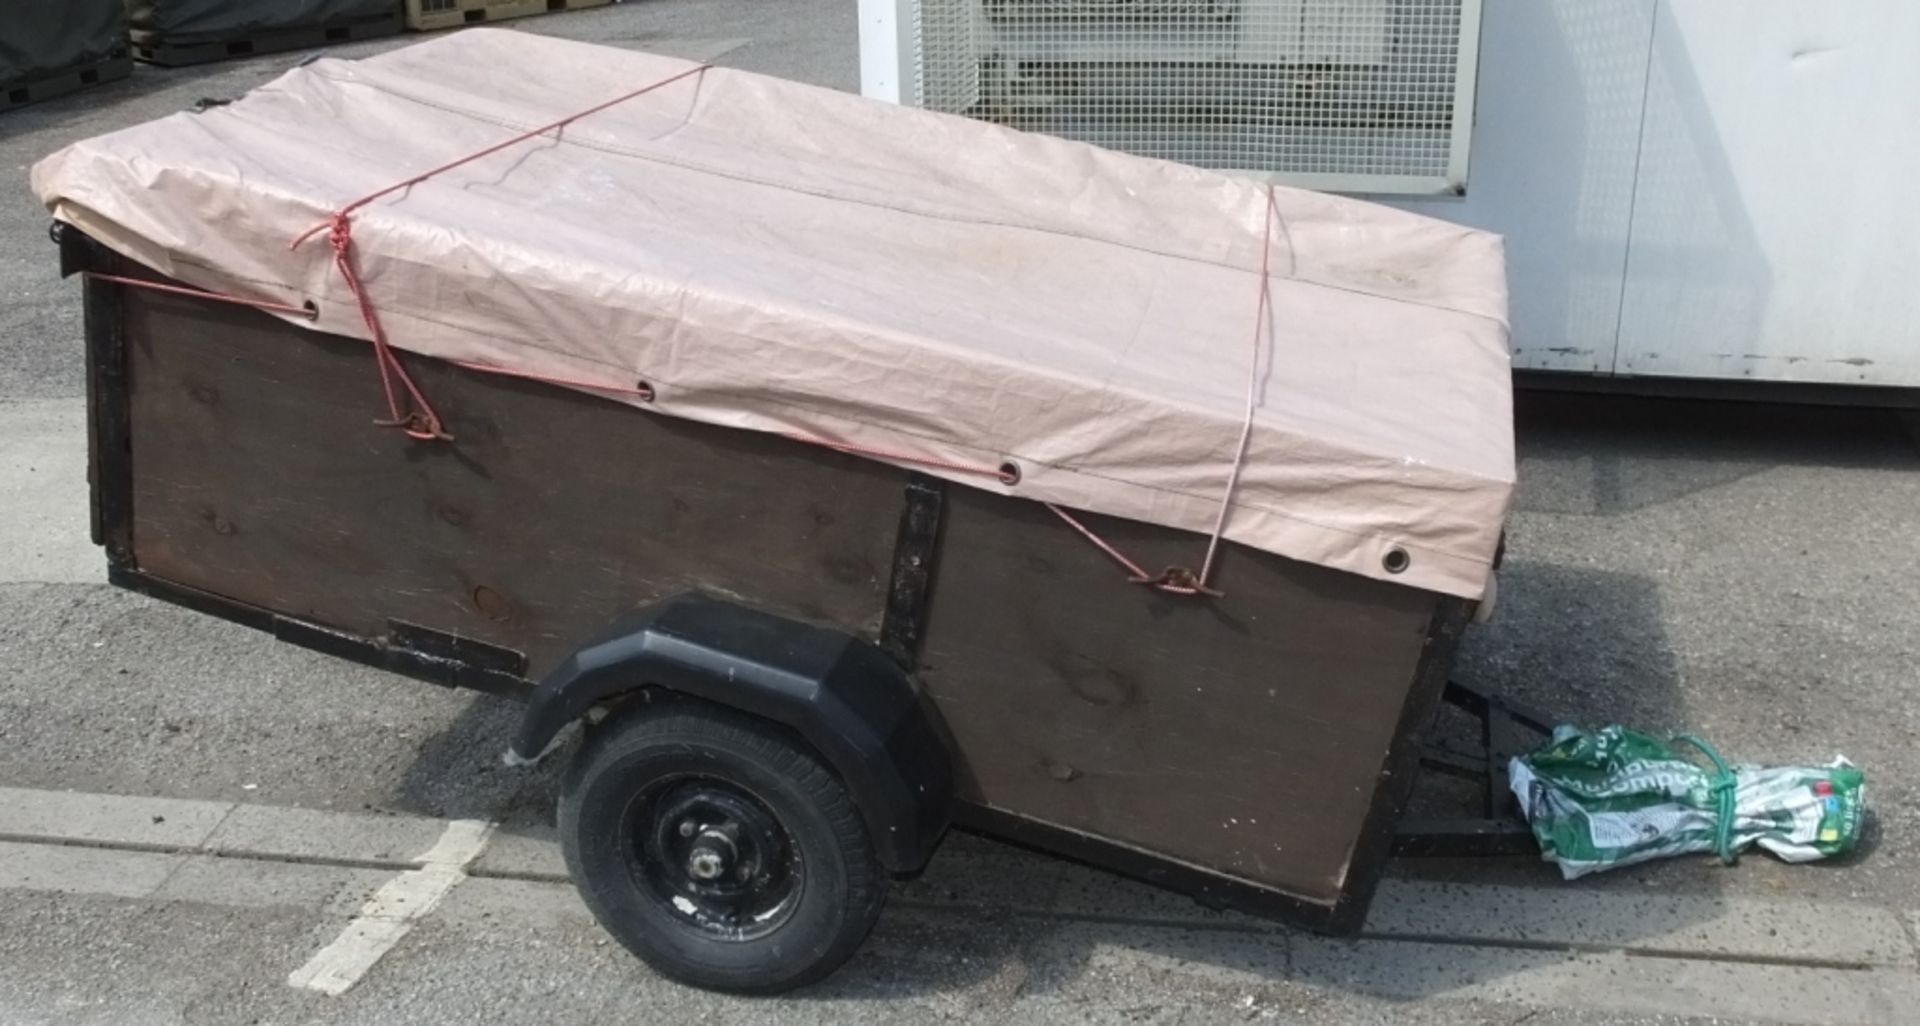 Trailer 2m x 1.2m with Electrics. Carrying Capacity approx 400kg. New Tyres.